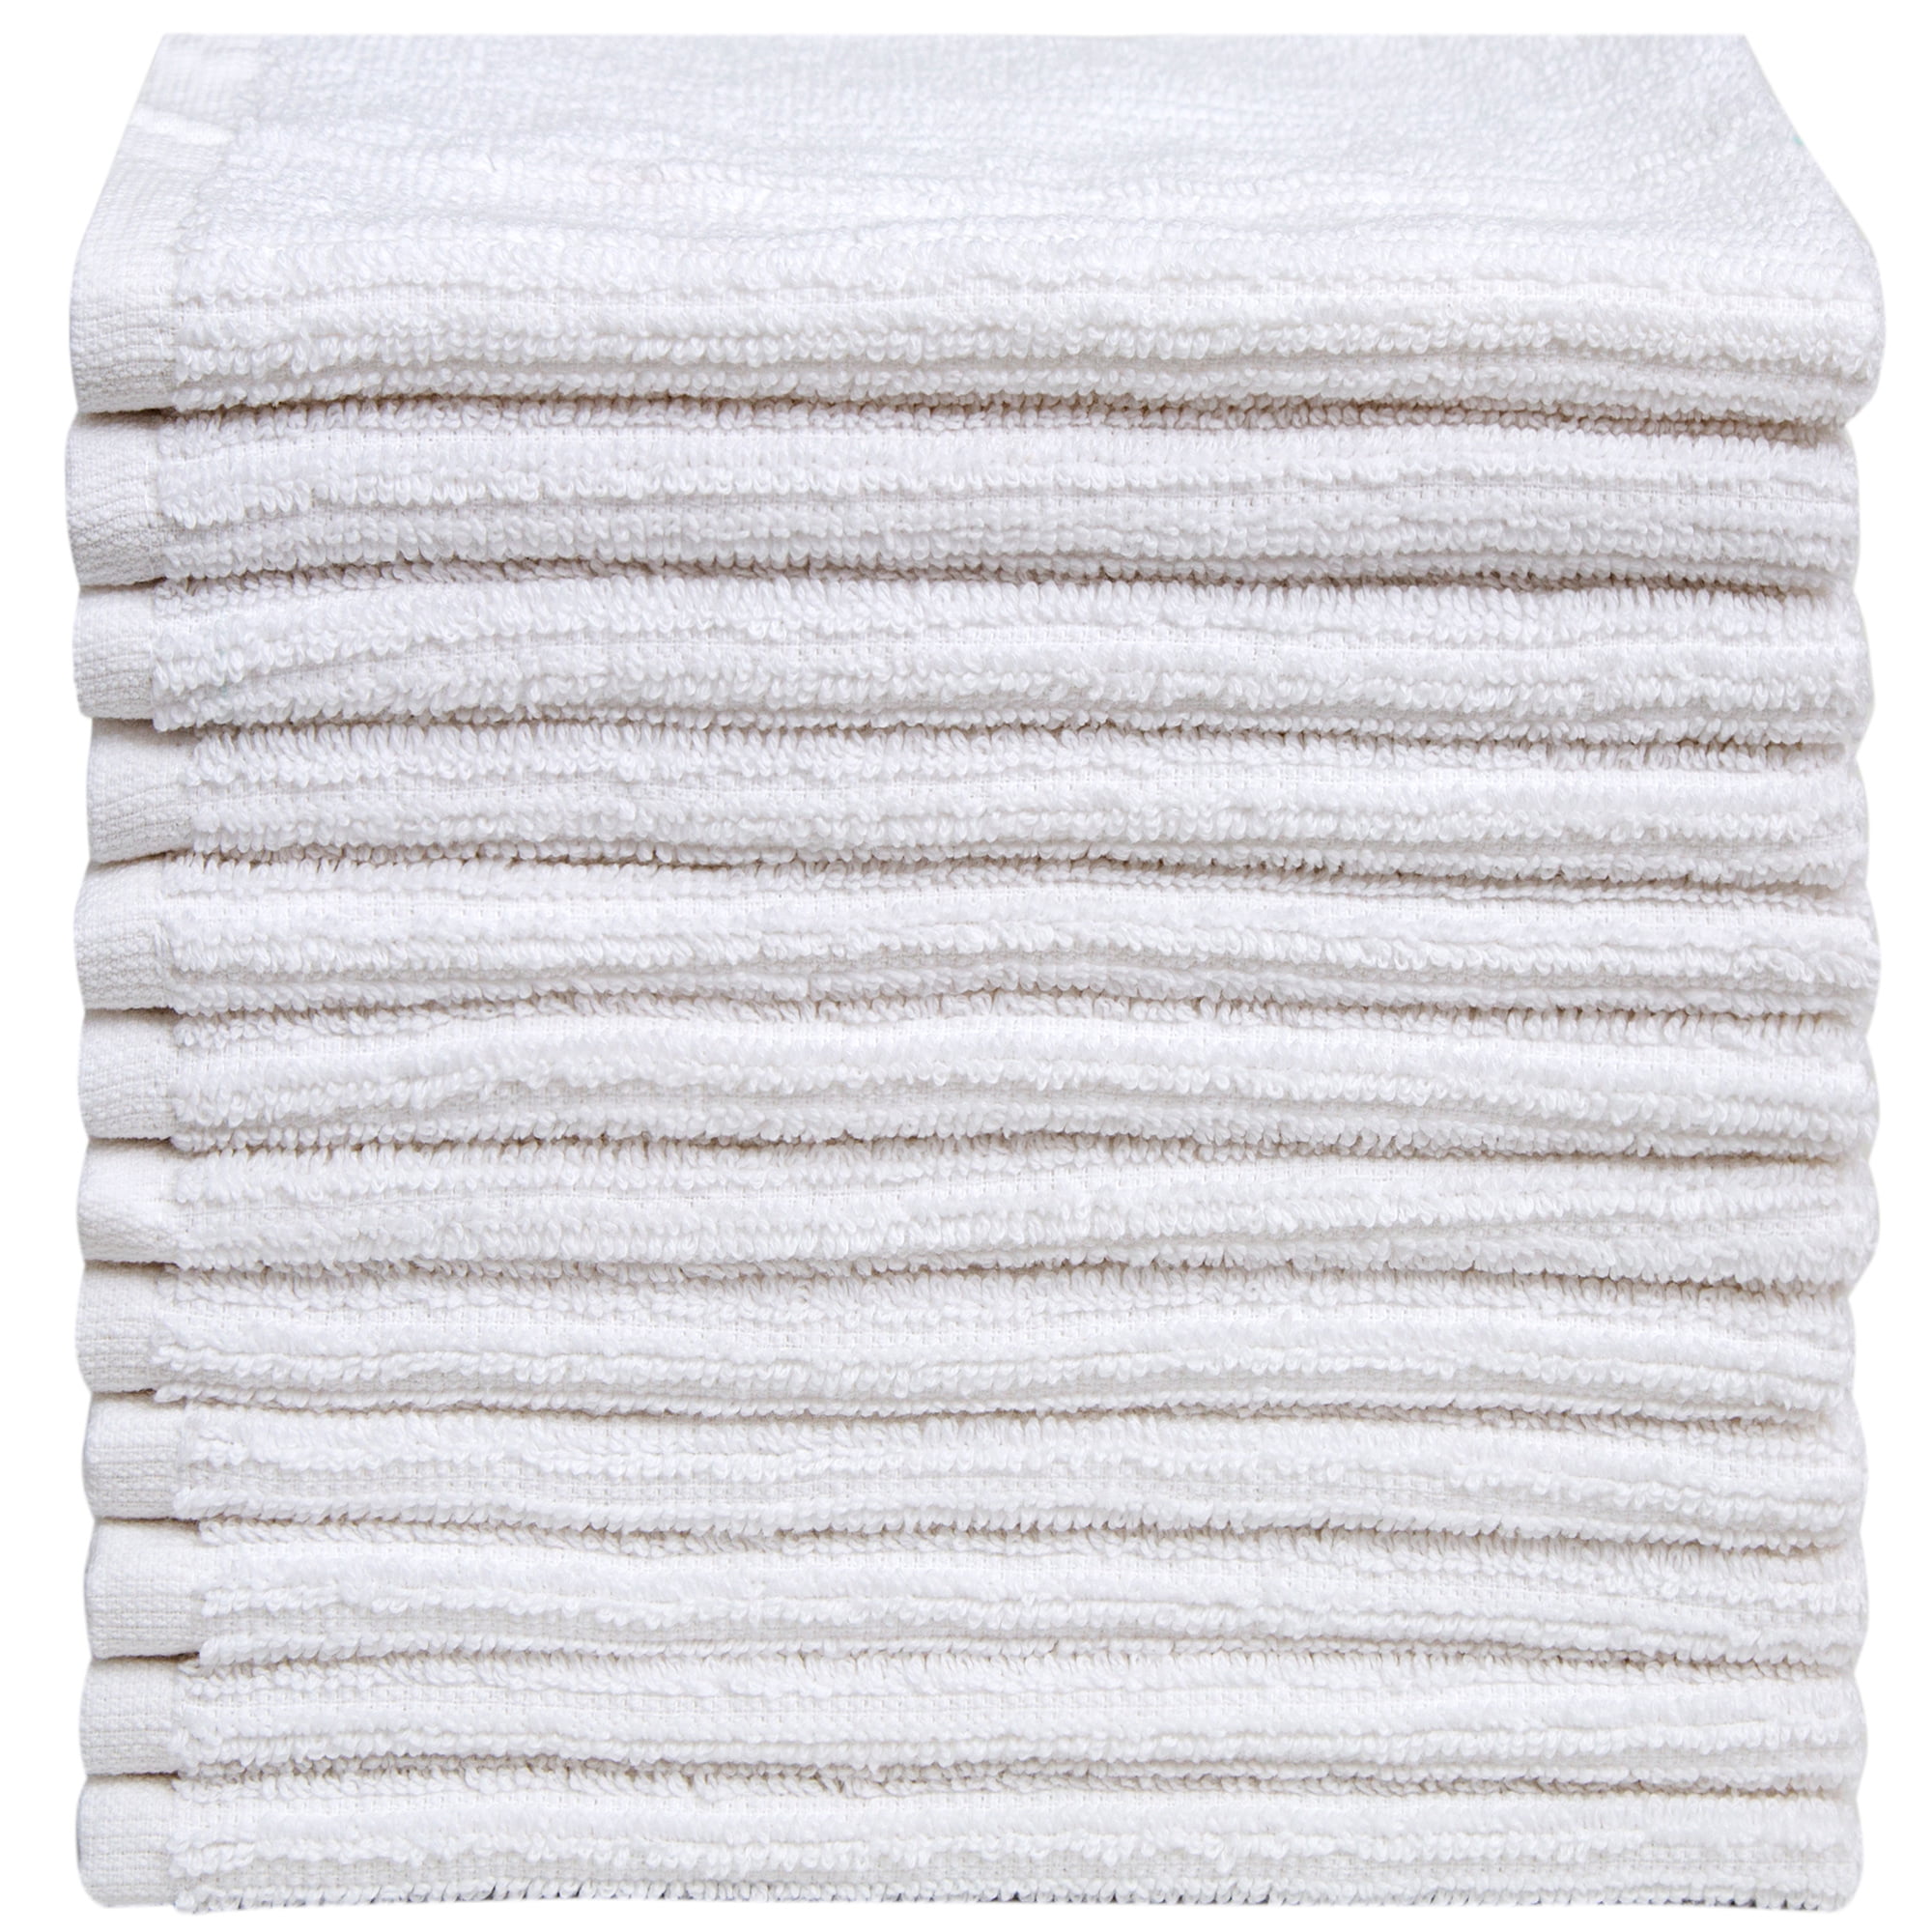 Kitchen Towels, 100% Cotton, Absorbent Rags for Cleaning Counter Top, Hand  Drying Dishes - Thick, Soft, Durable, Reusable, Dry Barmops 16” x 19”